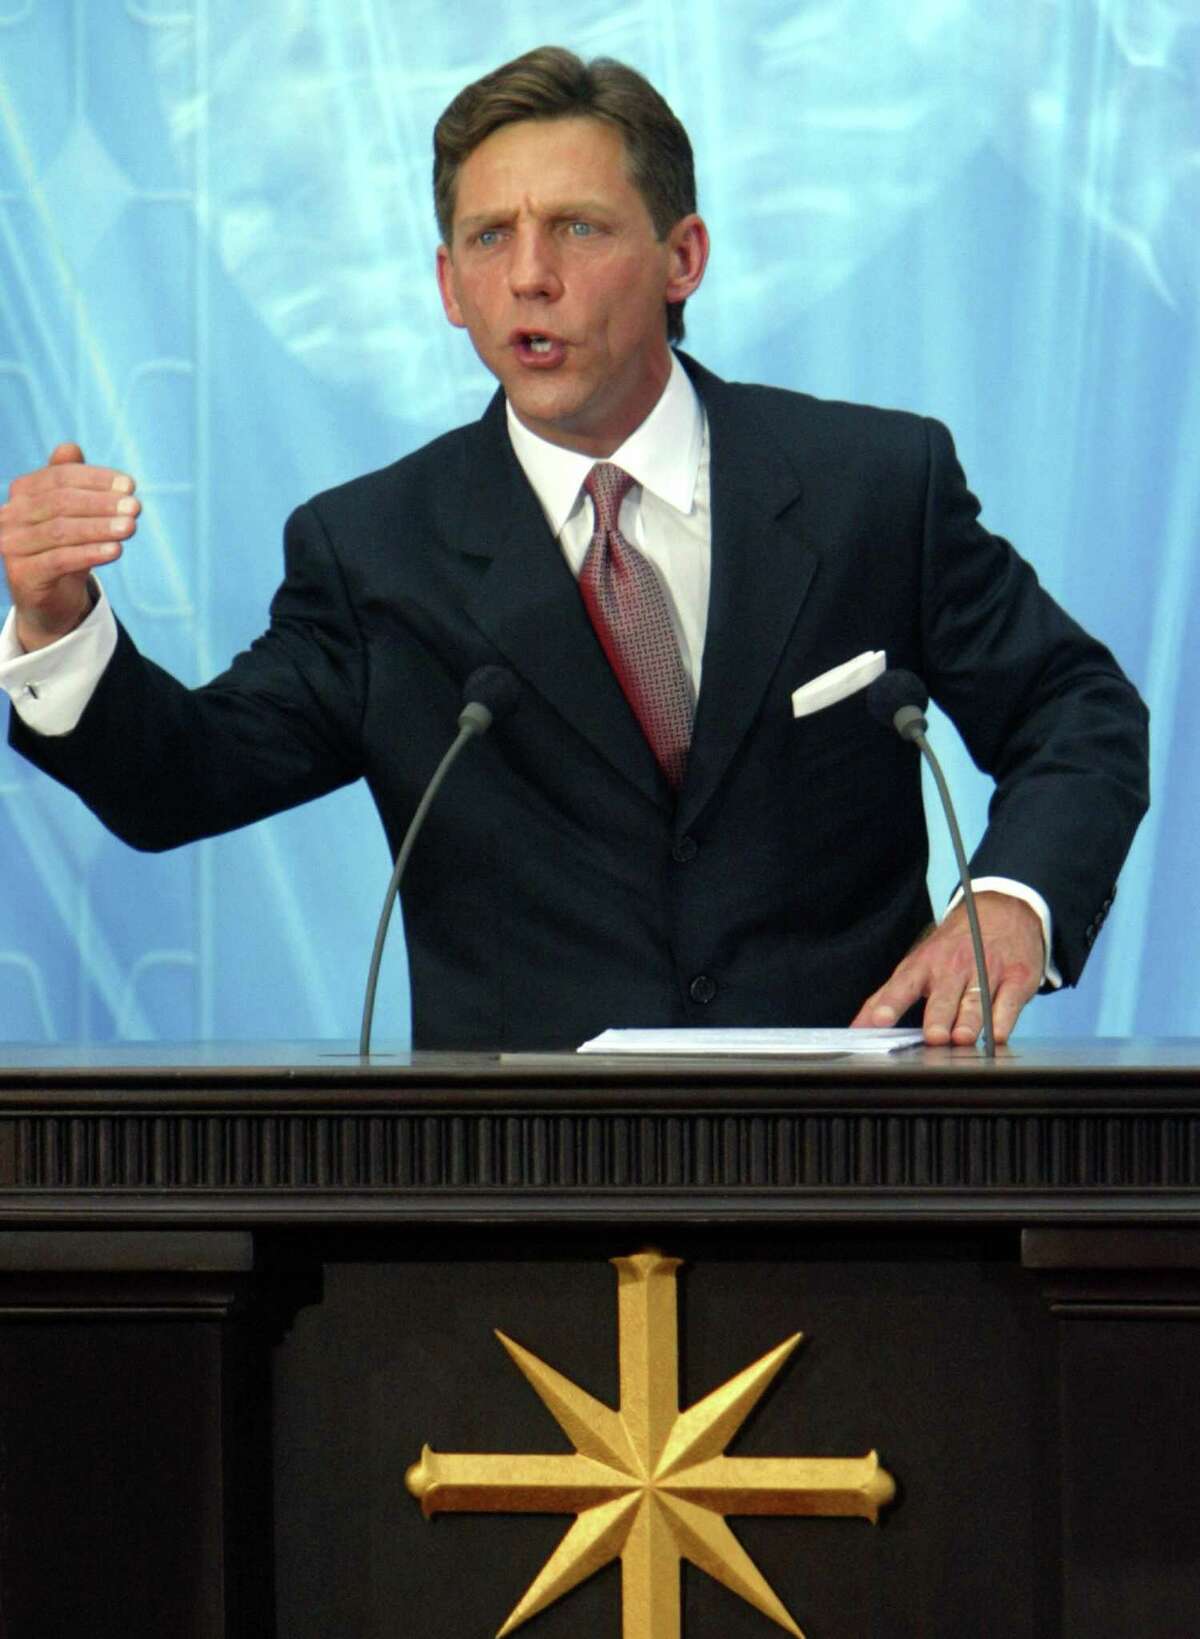 US Chairman of the Board Religious Technology Center David Miscavige speaks during the inauguration of the Church of Scientology in Madrid, 18 September 2004. AFP PHOTO/ Pierre-Philippe MARCOU